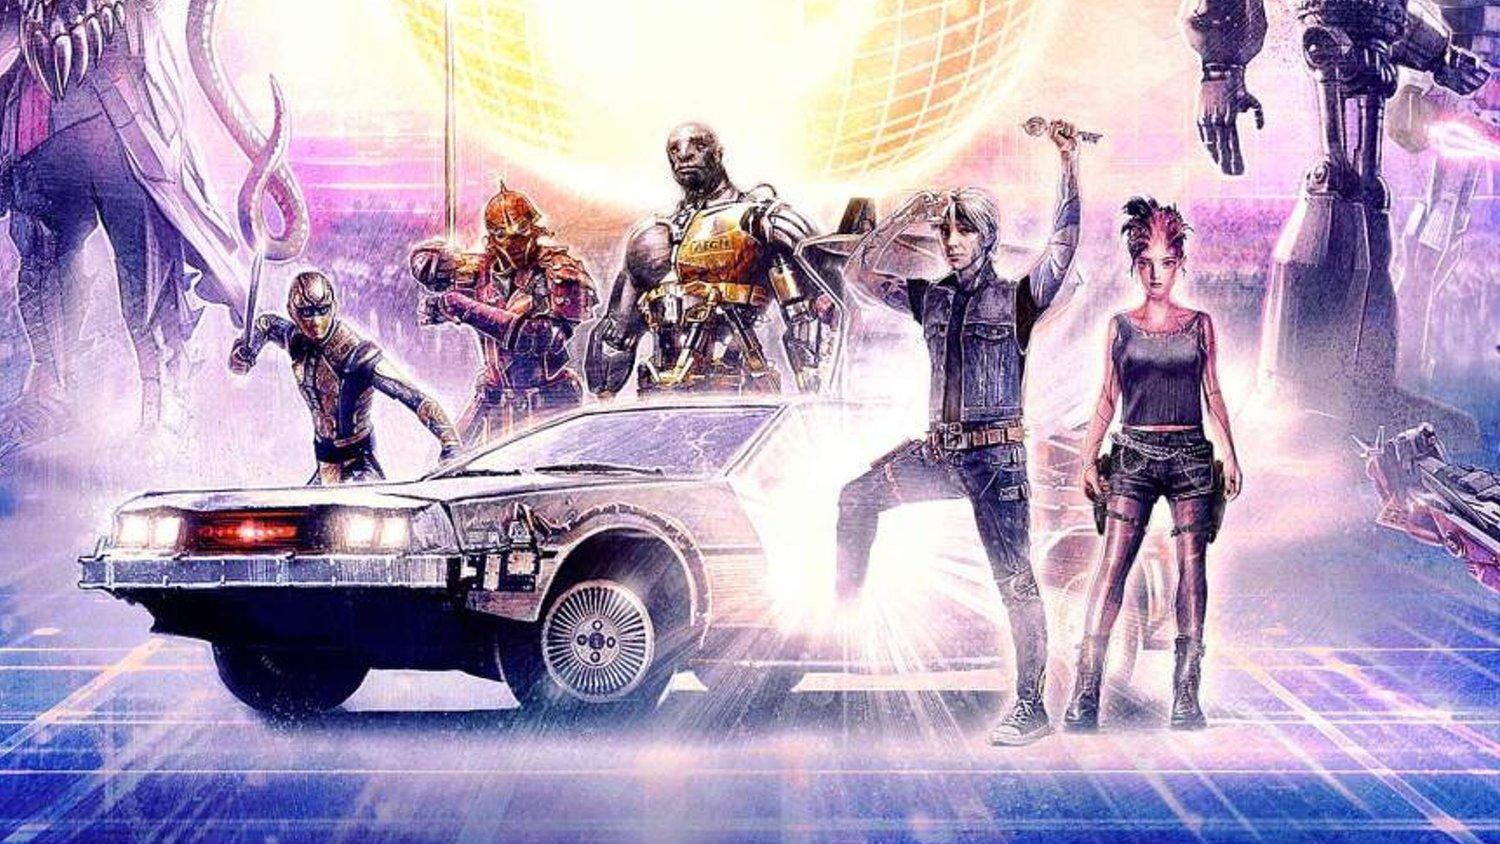 991151 Parzival, Artemisia, VirTual, Artemis, Ready player one - Rare  Gallery HD Wallpapers